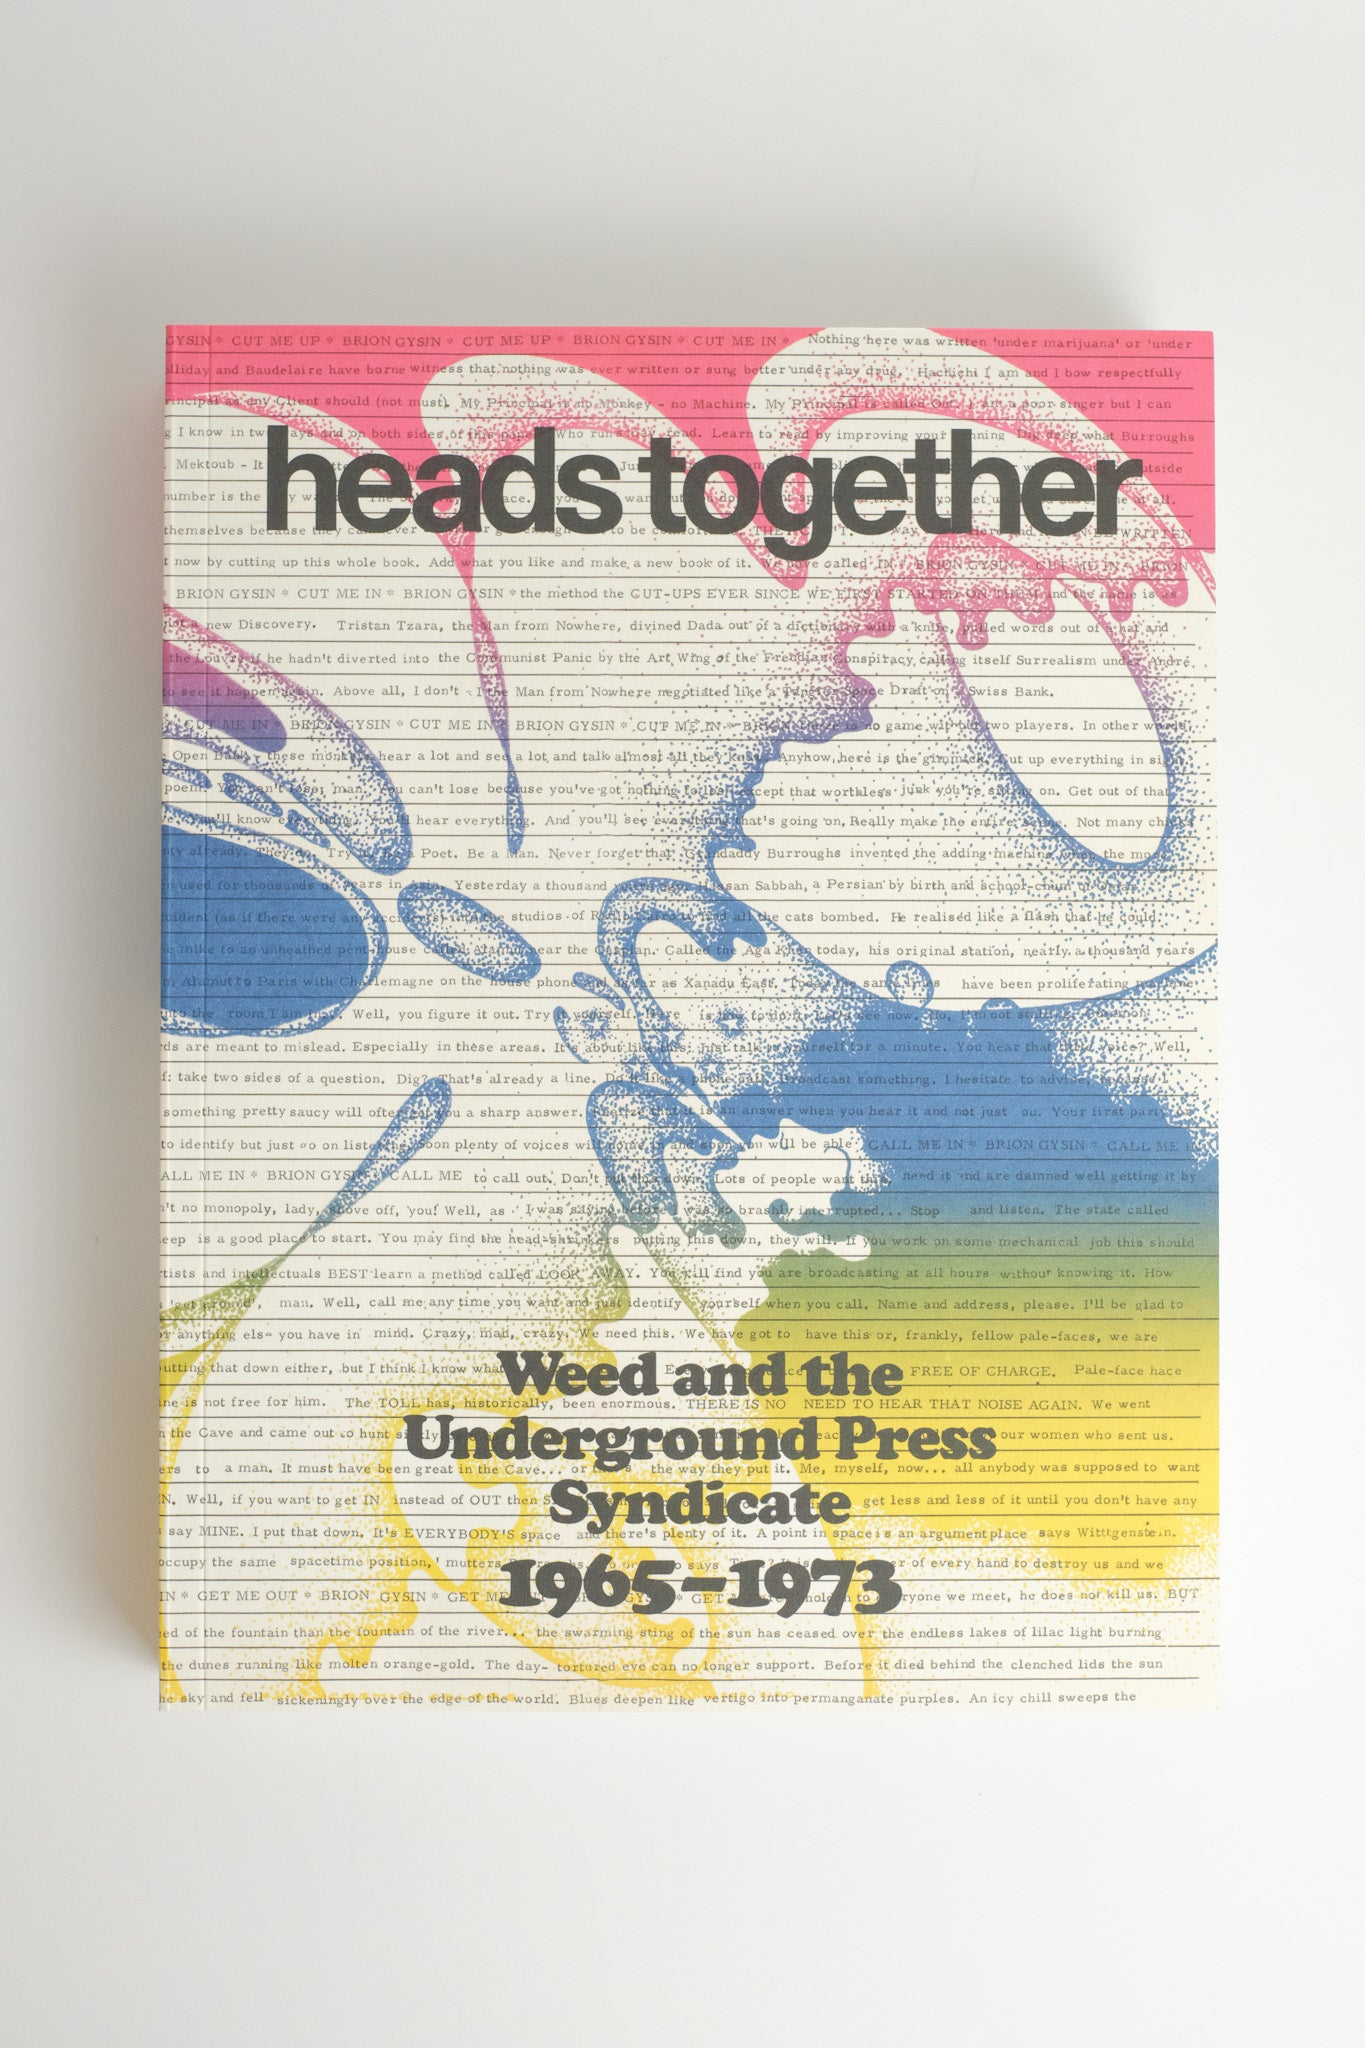 Heads Together: Weed and the Underground Press Syndicate, 1965-1973